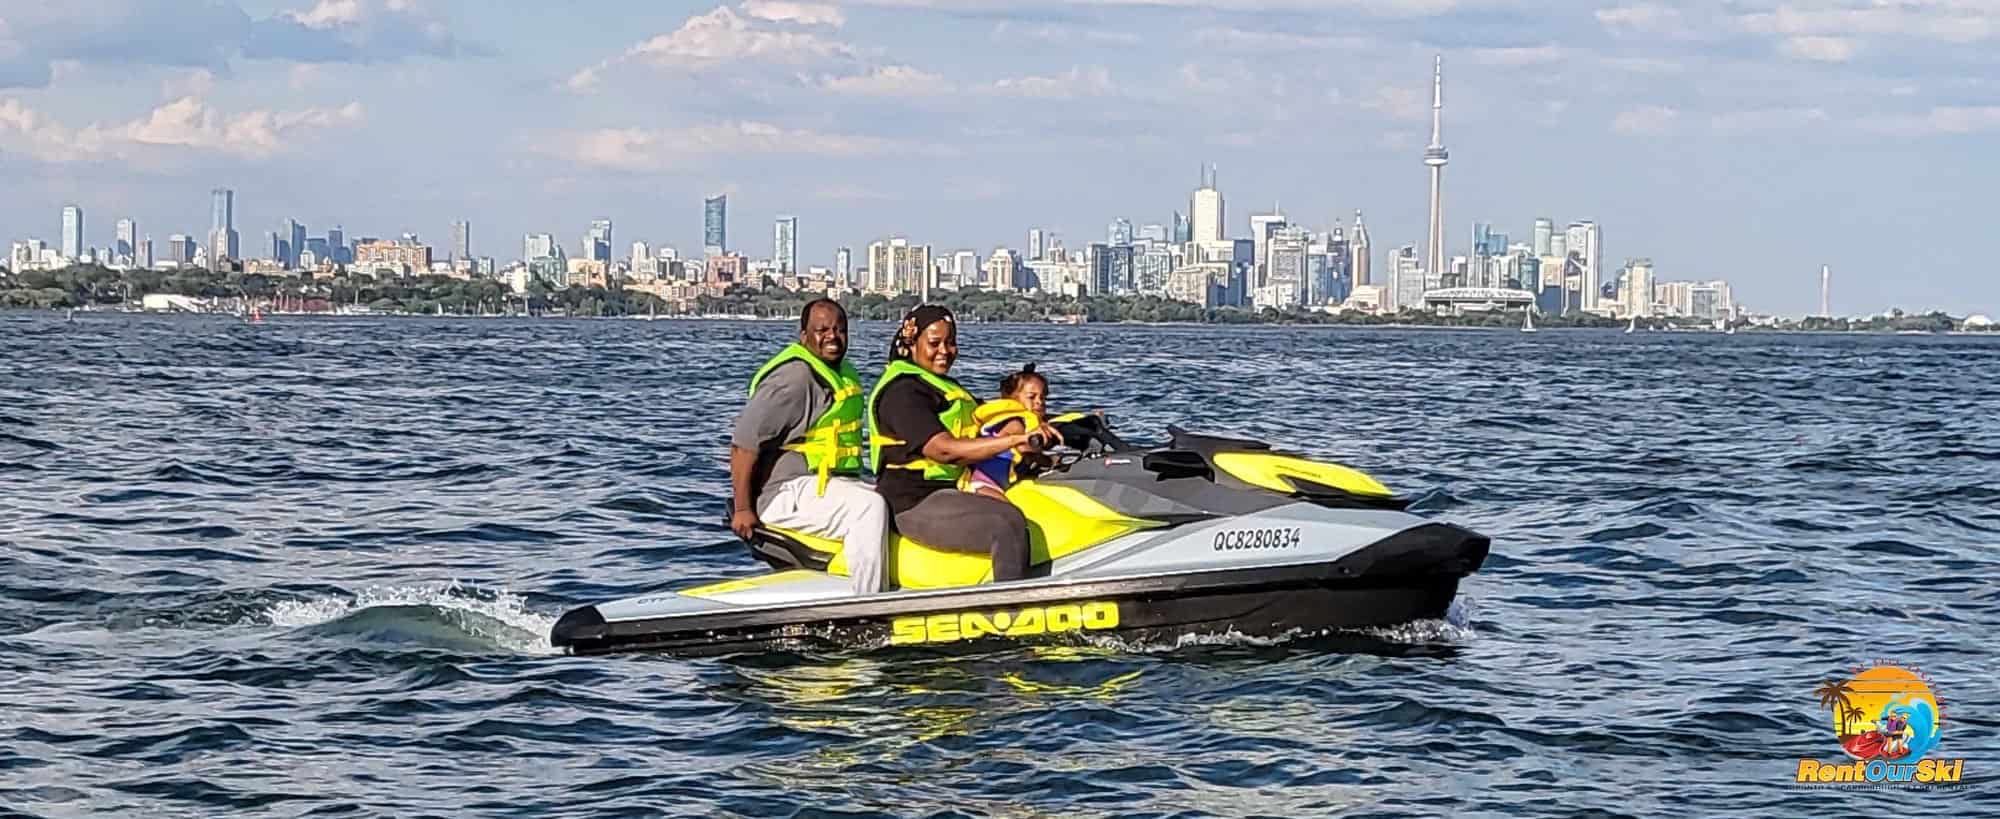 Family of three riding Neon Yellow rented Sea-Doo on Lake Ontario, with the Toronto Skyline in the background.